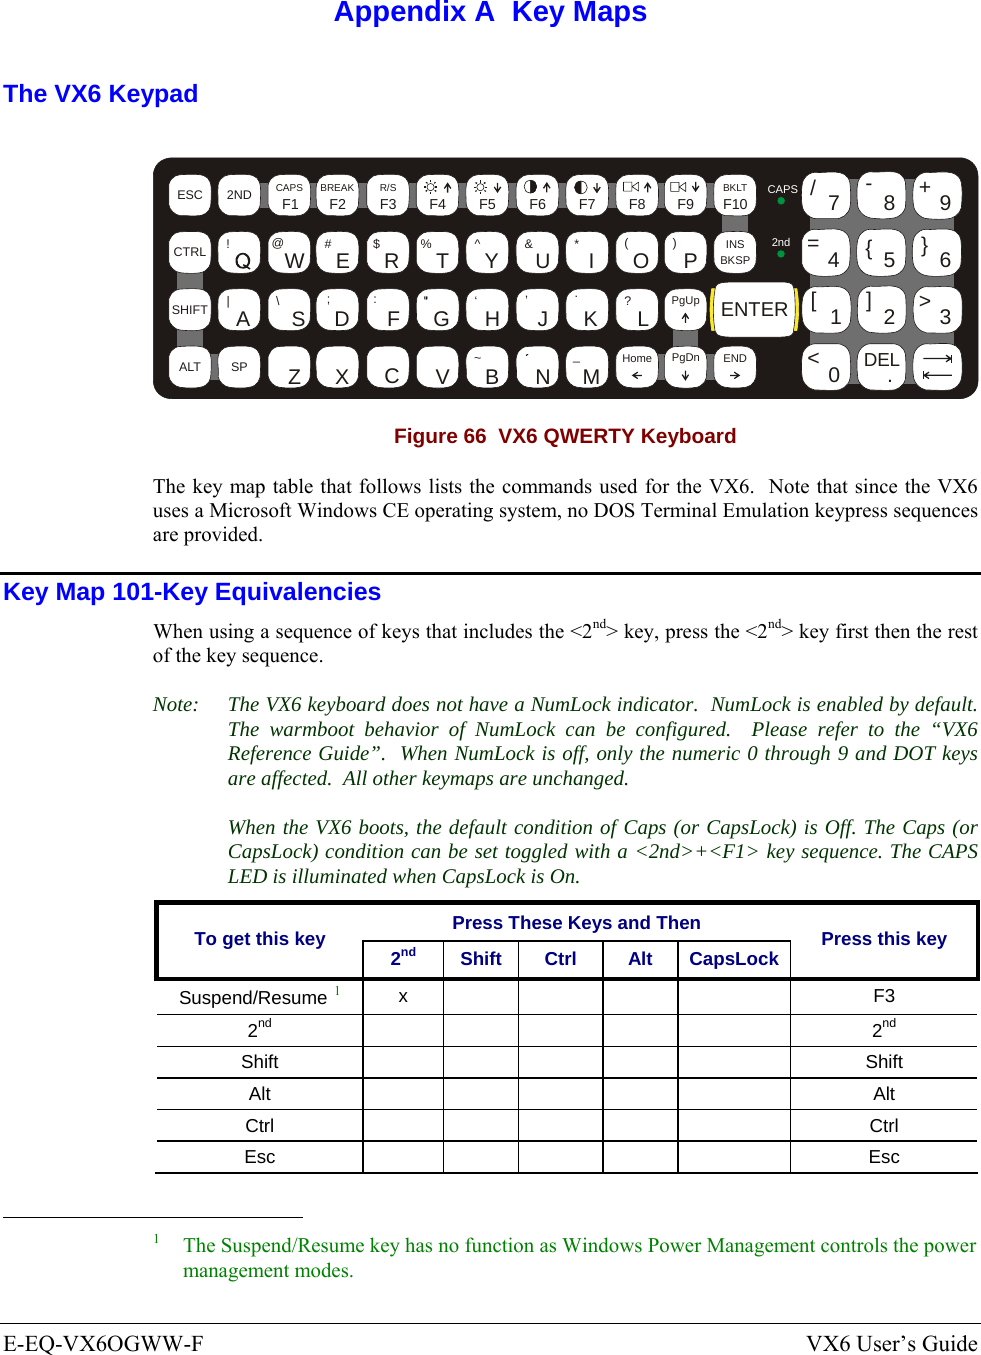  E-EQ-VX6OGWW-F  VX6 User’s Guide  Appendix A  Key Maps The VX6 Keypad  ESCSHIFT2NDALT SPF1 F2 F3 F4 F5 F6 F7 F8 F9CAPS BREAK R/SBCMNADFGHJKLSVXZ@#$%^&amp;*()F10BKLTINSBKSPEIOPRTUWYCTRL !|\ :; ‘,.?~_Home ENDENTERPgUpPgDn0.1245/78-+={}[]&gt;&lt;DEL369CAPS2nd Figure 66  VX6 QWERTY Keyboard The key map table that follows lists the commands used for the VX6.  Note that since the VX6 uses a Microsoft Windows CE operating system, no DOS Terminal Emulation keypress sequences are provided. Key Map 101-Key Equivalencies When using a sequence of keys that includes the &lt;2nd&gt; key, press the &lt;2nd&gt; key first then the rest of the key sequence.  Note:  The VX6 keyboard does not have a NumLock indicator.  NumLock is enabled by default.  The warmboot behavior of NumLock can be configured.  Please refer to the “VX6 Reference Guide”.  When NumLock is off, only the numeric 0 through 9 and DOT keys are affected.  All other keymaps are unchanged.    When the VX6 boots, the default condition of Caps (or CapsLock) is Off. The Caps (or CapsLock) condition can be set toggled with a &lt;2nd&gt;+&lt;F1&gt; key sequence. The CAPS LED is illuminated when CapsLock is On. Press These Keys and Then To get this key  2nd Shift Ctrl  Alt CapsLock Press this key Suspend/Resume 1 x         F3 2nd       2nd Shift       Shift Alt       Alt Ctrl       Ctrl Esc       Esc                                                            1   The Suspend/Resume key has no function as Windows Power Management controls the power management modes. 